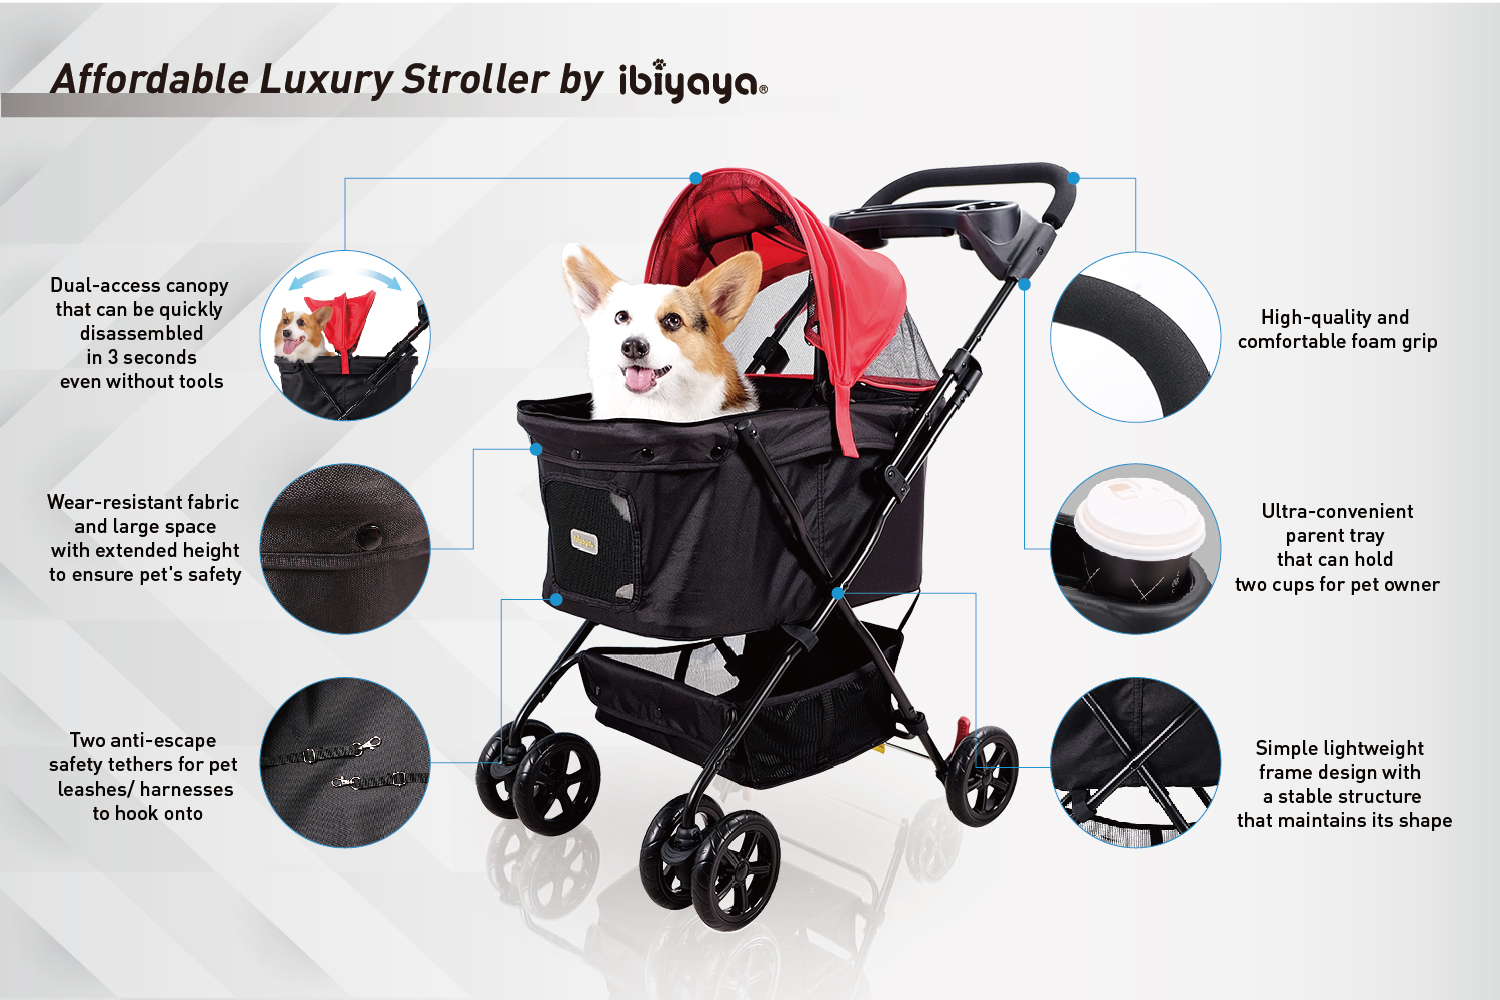 Ibiyaya Easy Strolling Pet Buggy for Cats & Dogs up to 20kg - Rouge Red image 11